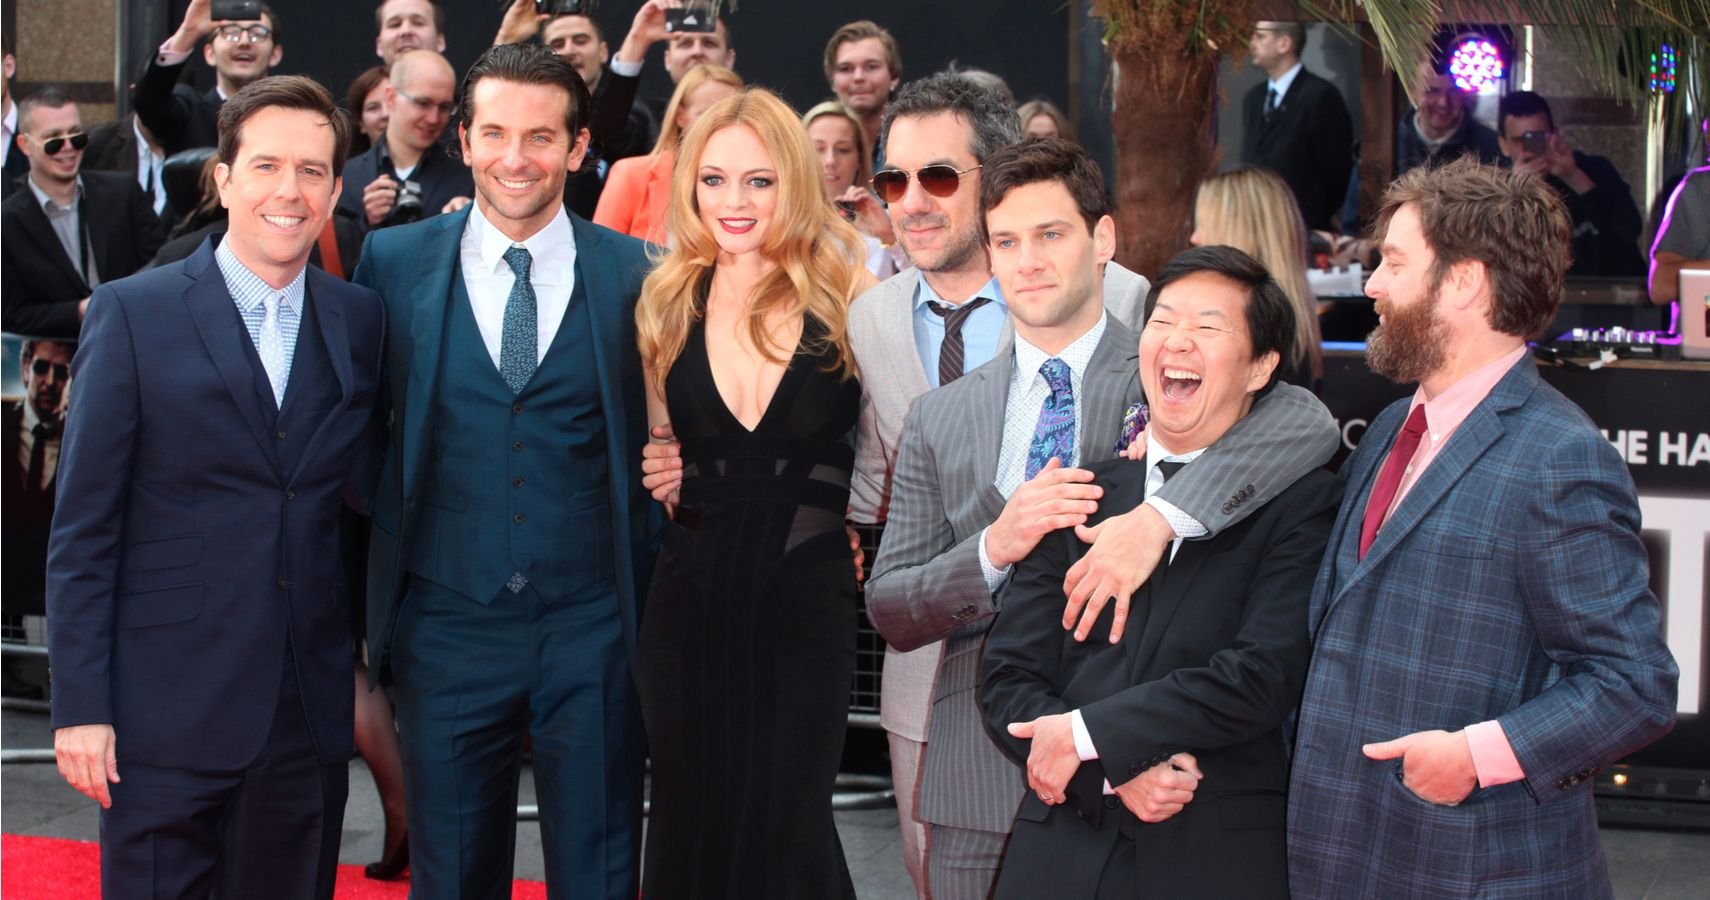 Then Vs. Now: Ranking The Net Worth Of The Cast Of 'The Hangover' After 11 Years